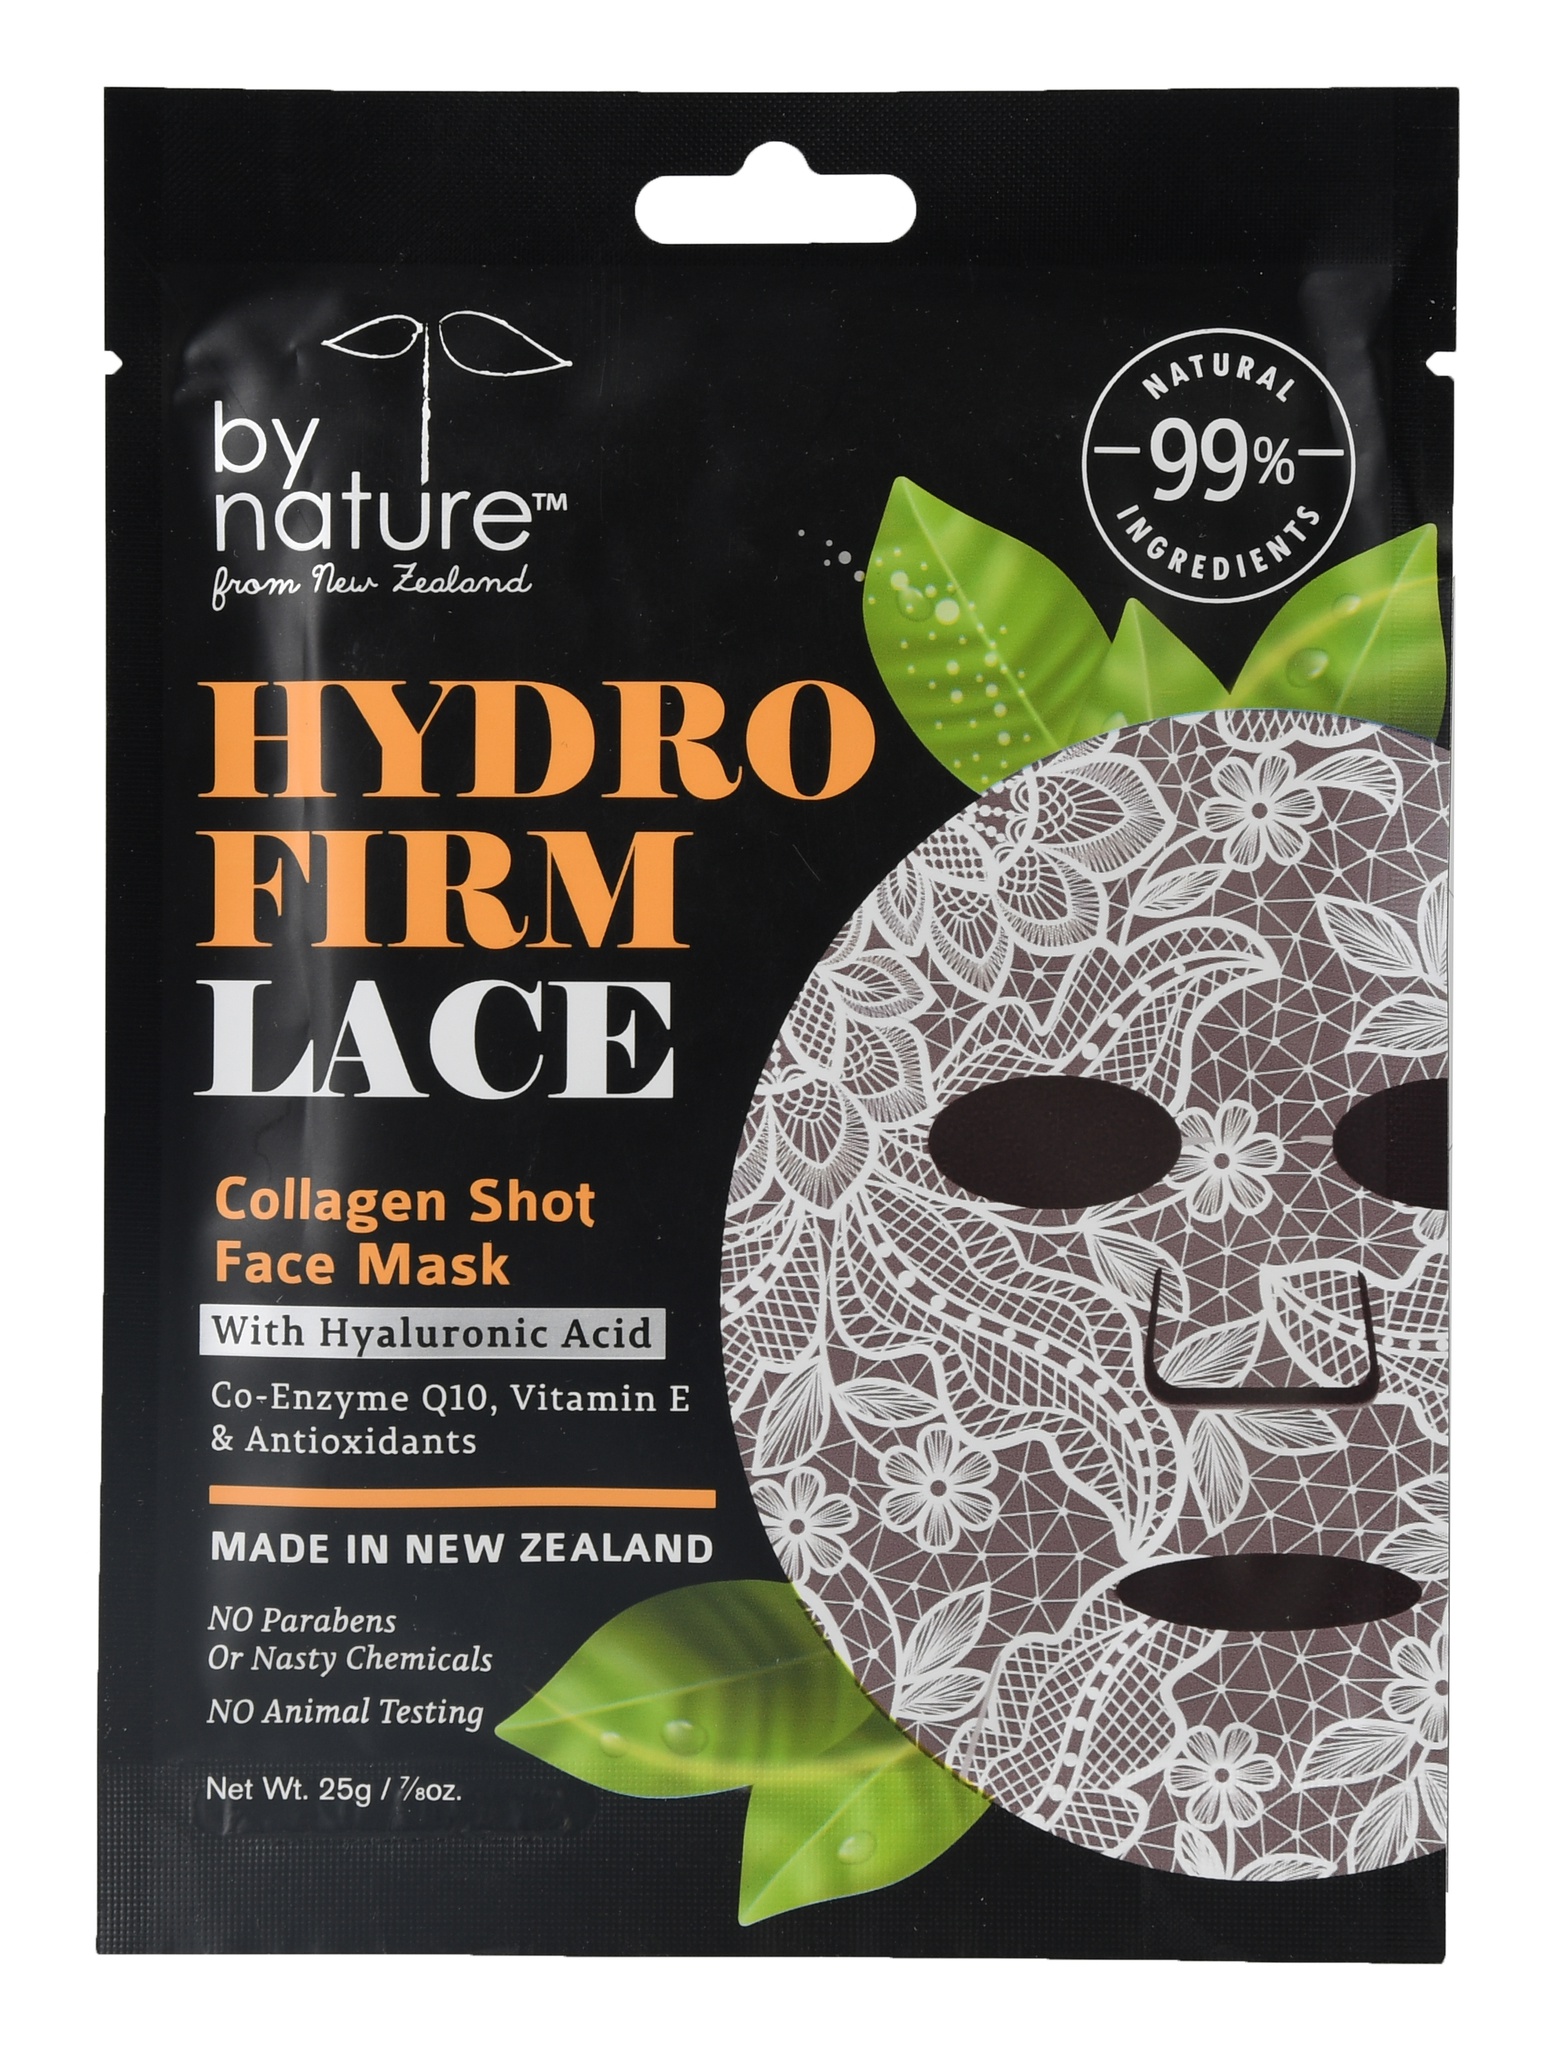 By Nature Hydro Firm Lace Collagen Shot Face Mask